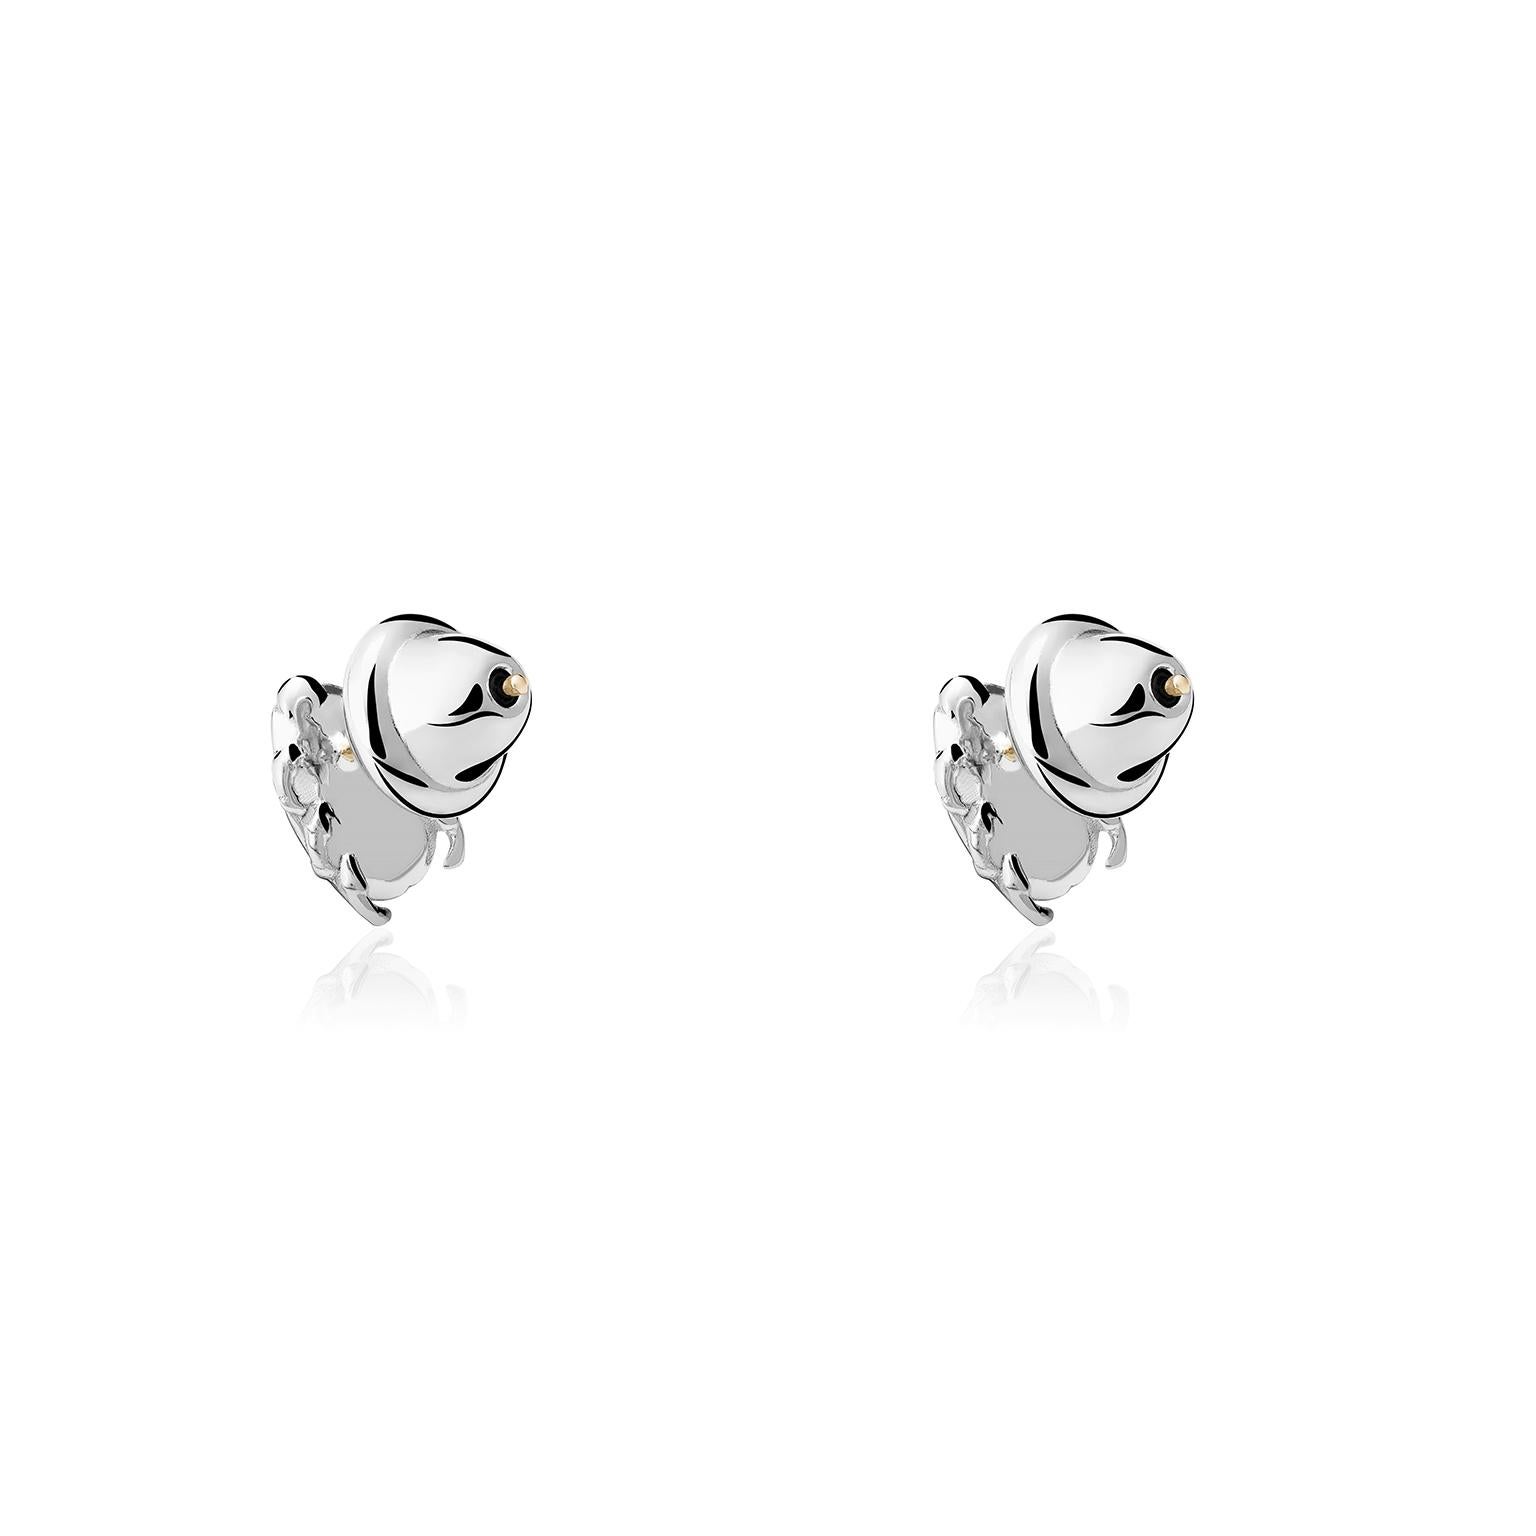 The Beetle Stud Earrings from TANE's Animal´s Collection are made in .925 Silver. Its total shape is a beetle sculpted with the maximum attention to detail of it´s shape and textures. Handmade in Mexico.

To preserve the beauty of your TANE